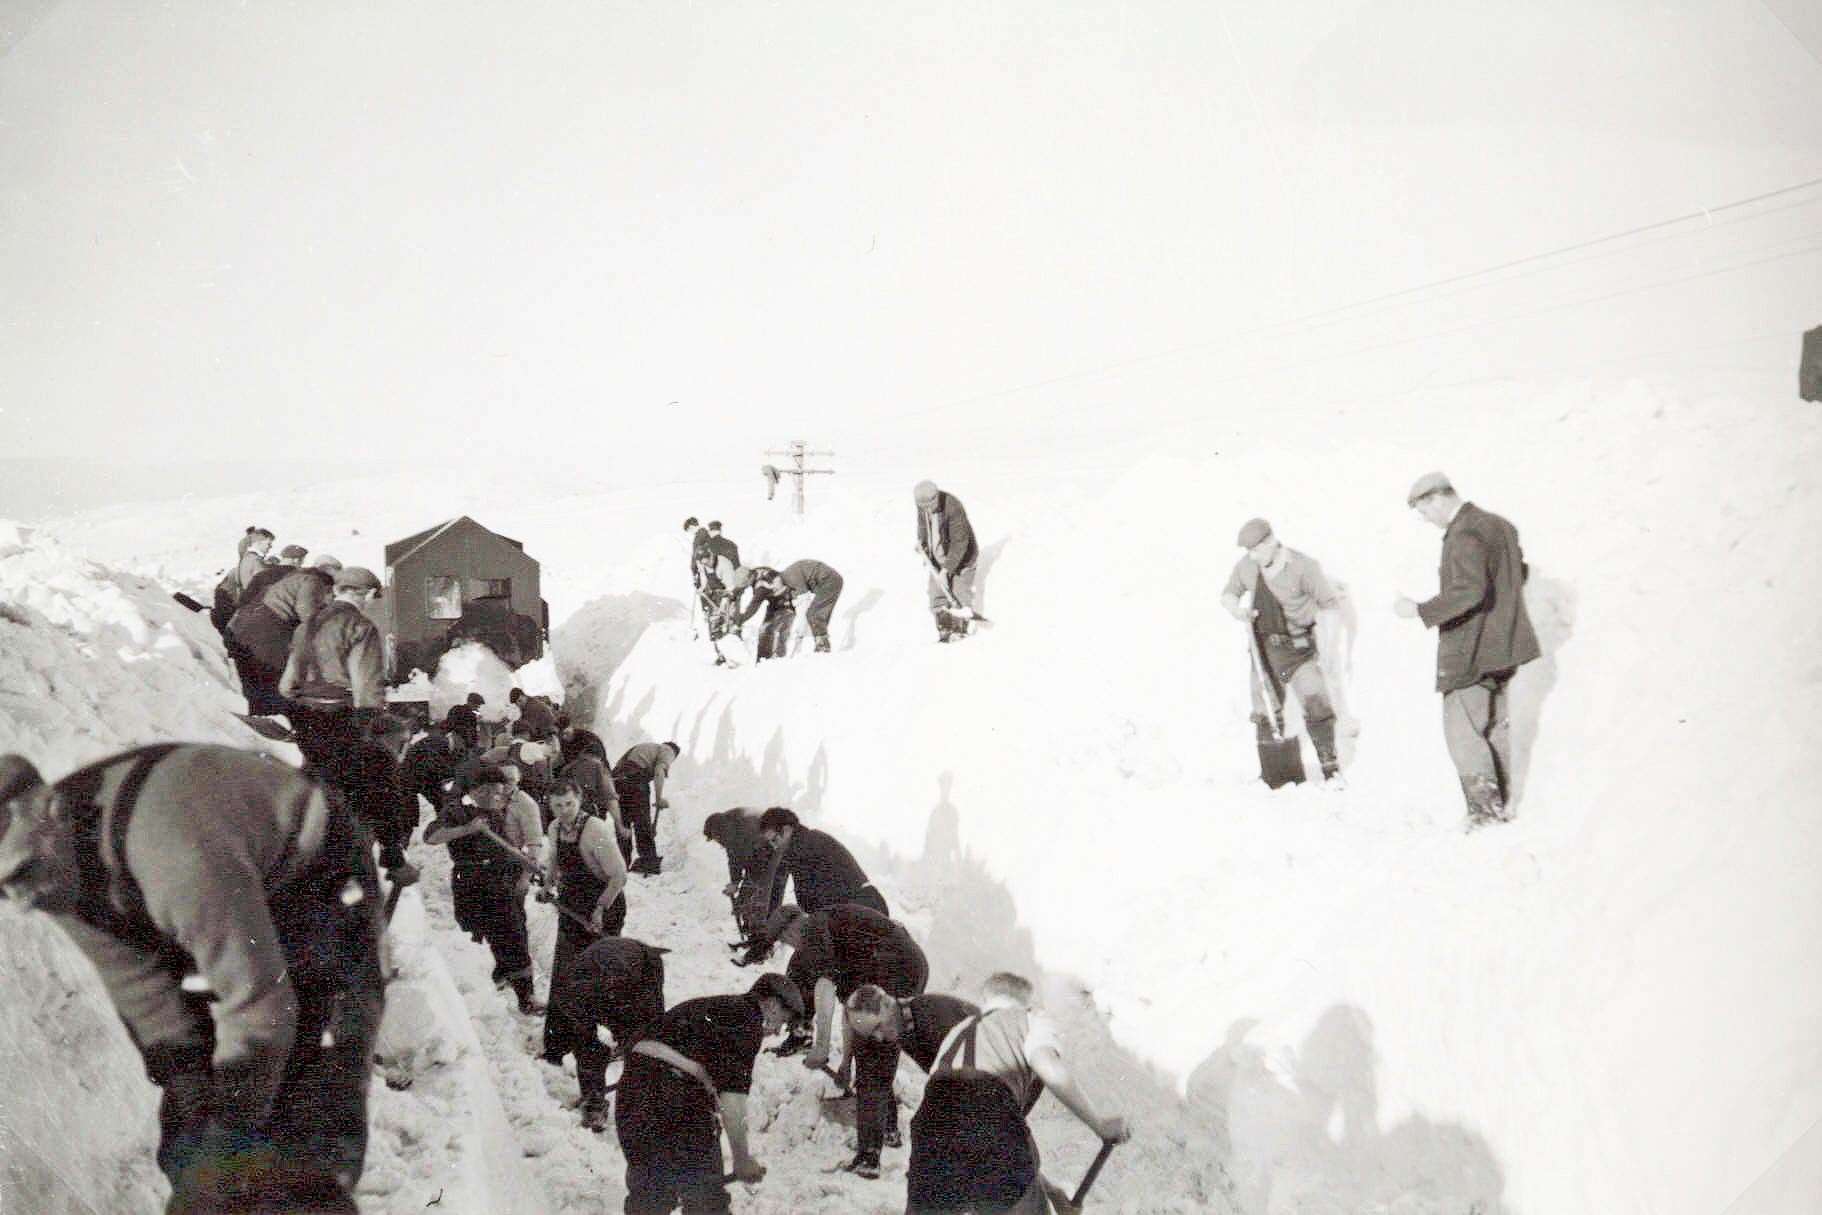 Railway workers clearing snow along the line by hand. Picture: Highland Railway Society/Am Baile